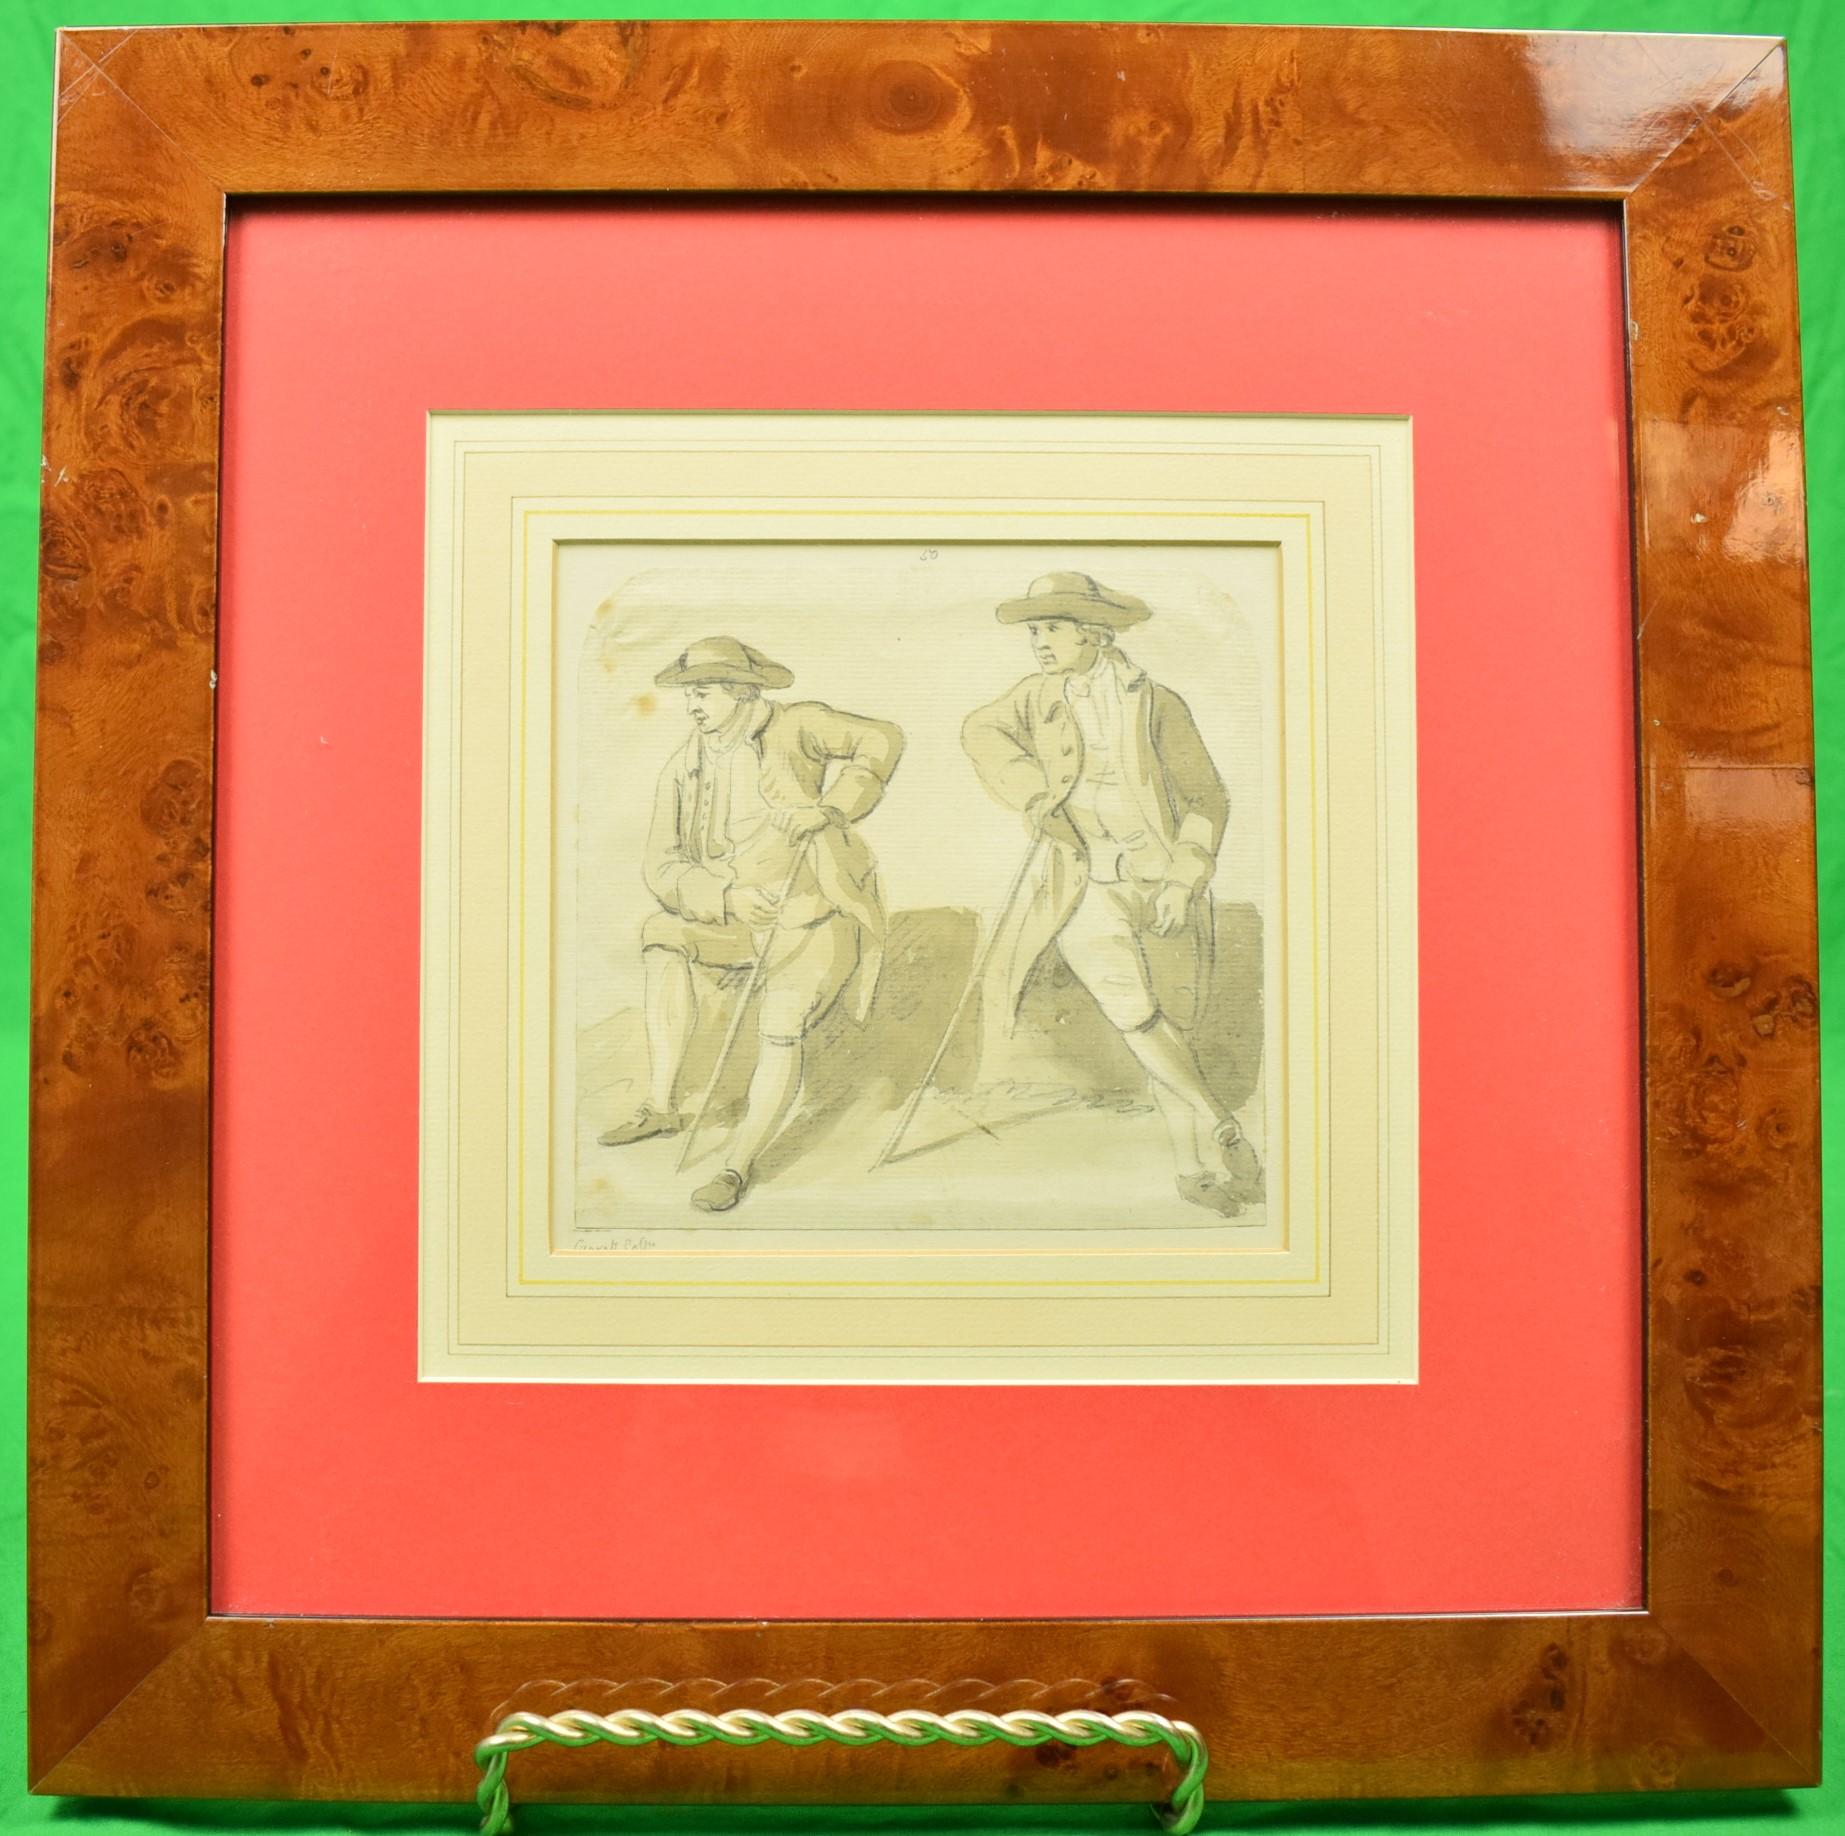 Art Sz: 6"H x 6 1/4"W

Frame Sz: 15 1/4"H x 15 1/4"W

In coral mat w/ lacquer birdseye maple frame

Classic drawing in blue and grey washes over pencil on laid paper depicting two 'rustics by a lake' by the British artist Paul Sandby (1730-1809)